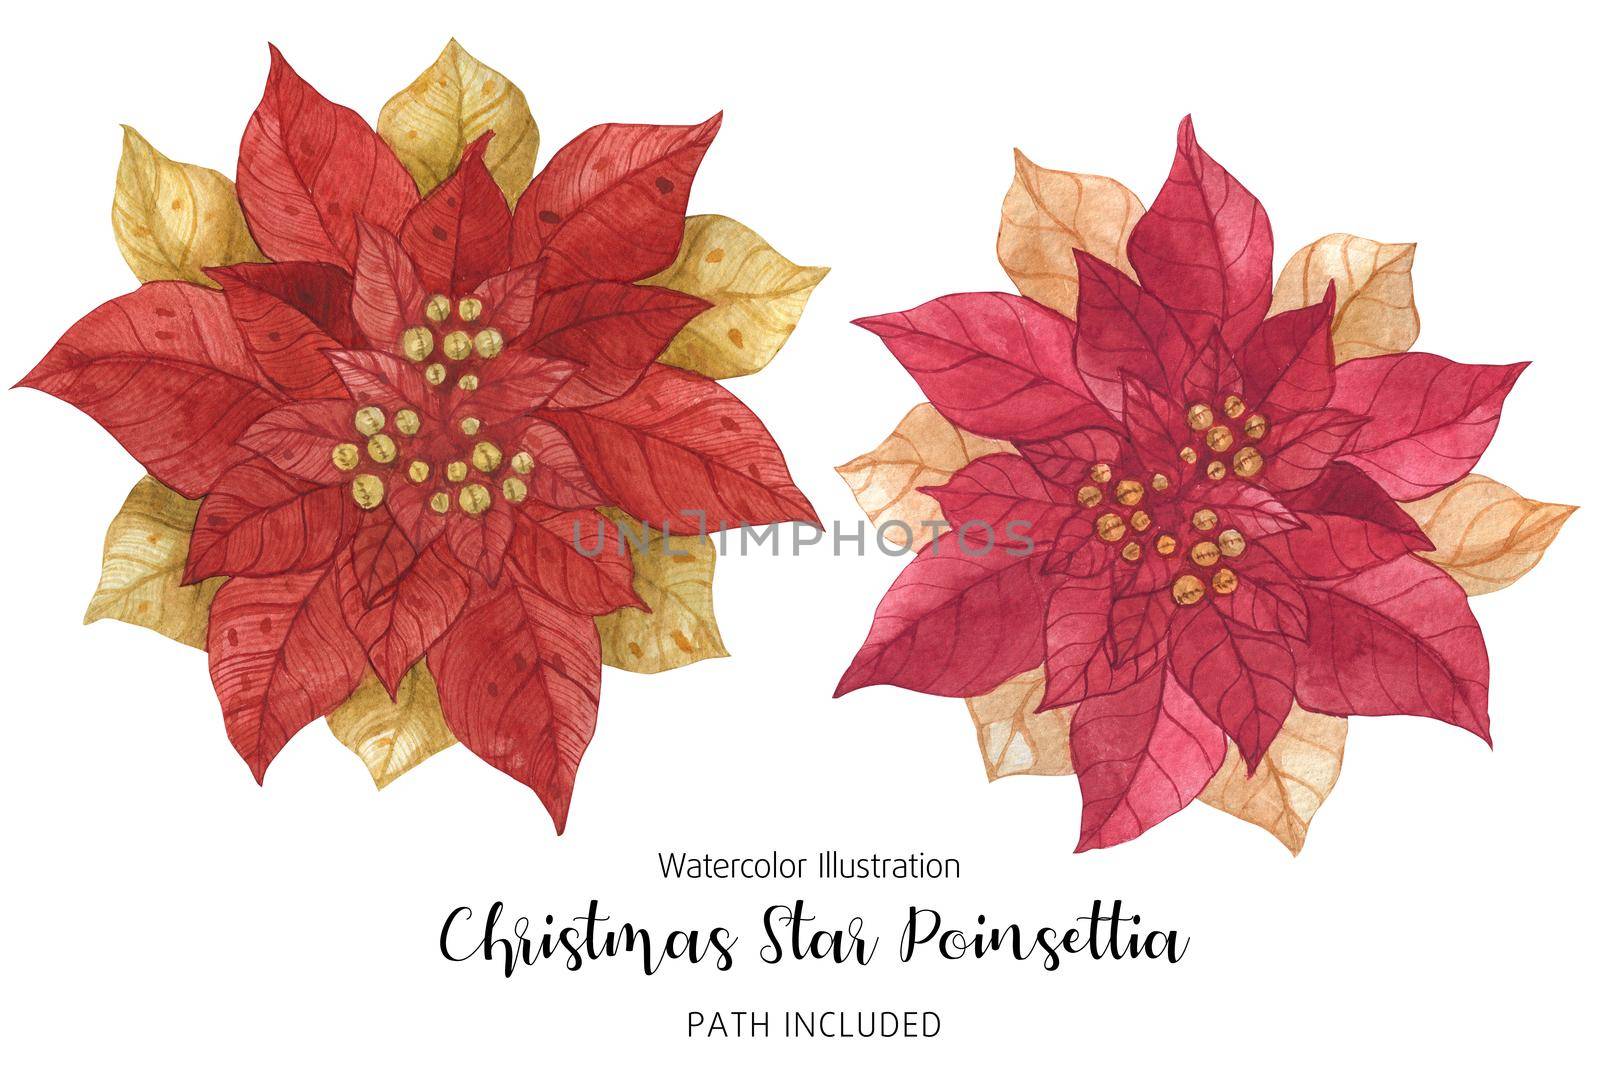 Poinsettia Red Gold Christmas Star Flowers, watercolor hand-made illustration